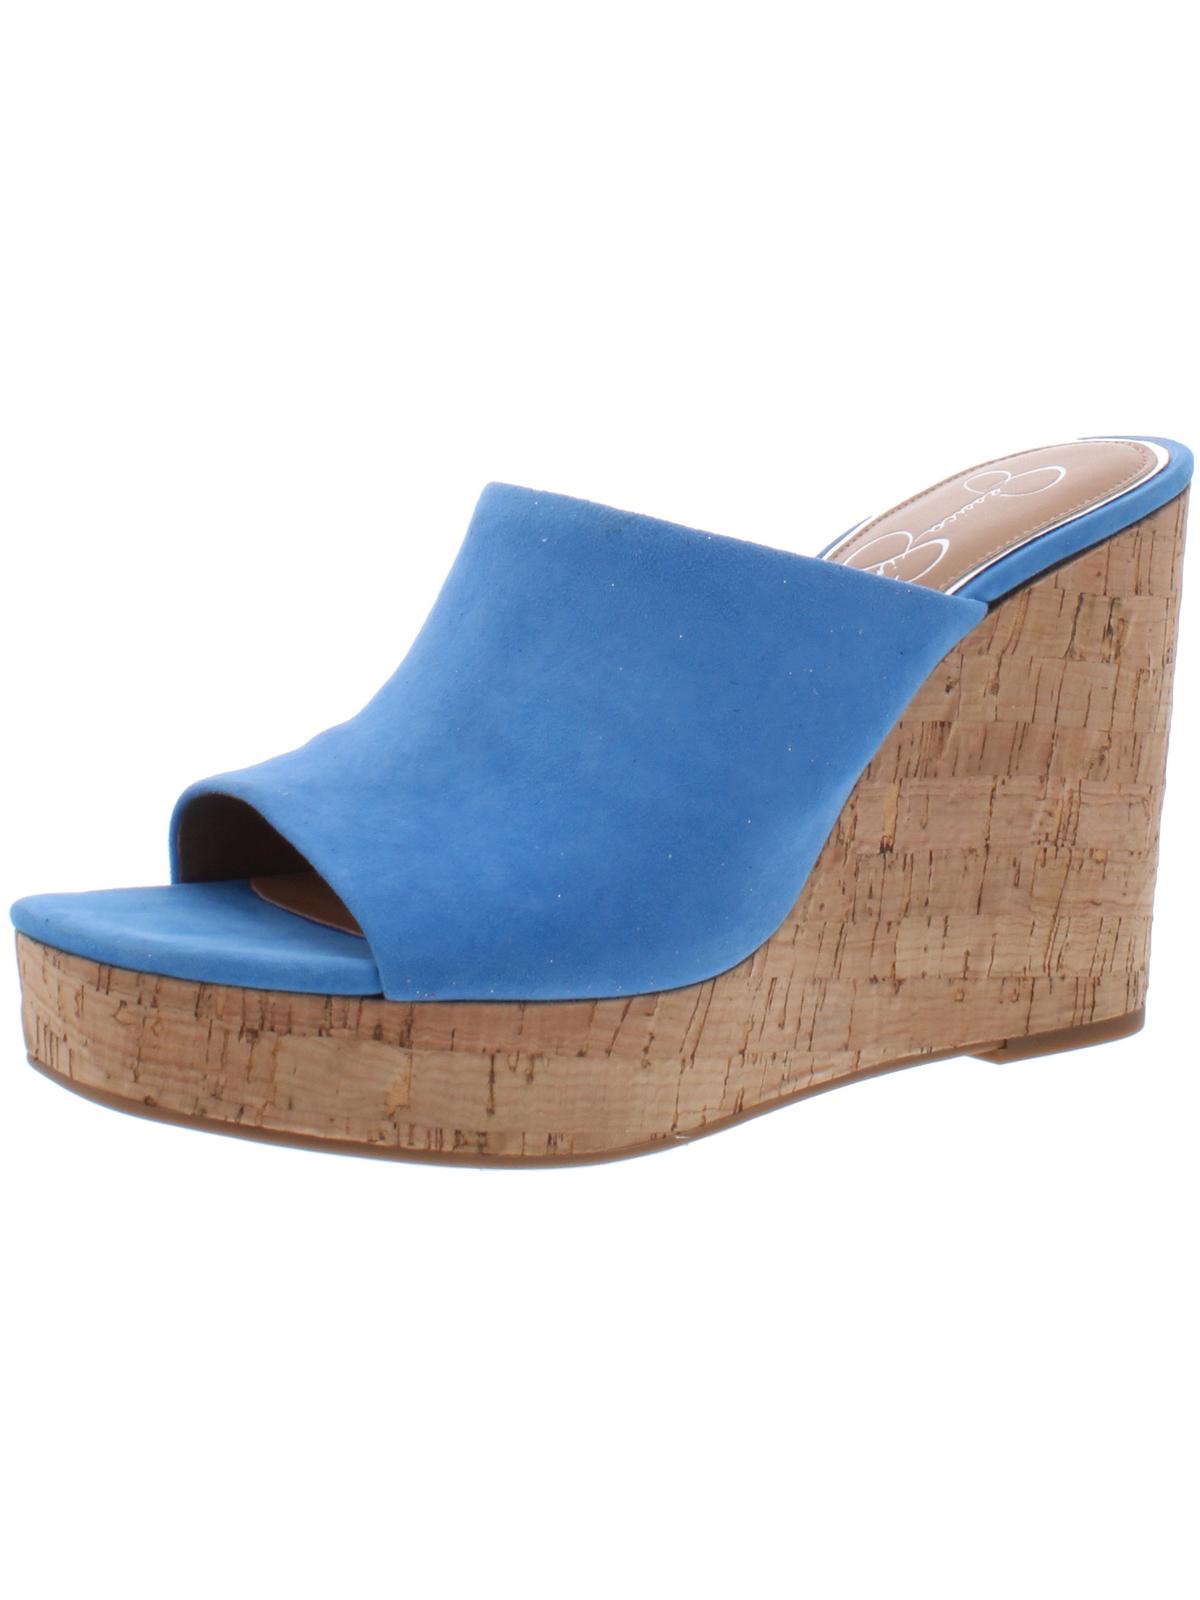 Jessica Simpson Womens Shantelle Covered Wedge Wedge Sandals - image 1 of 3